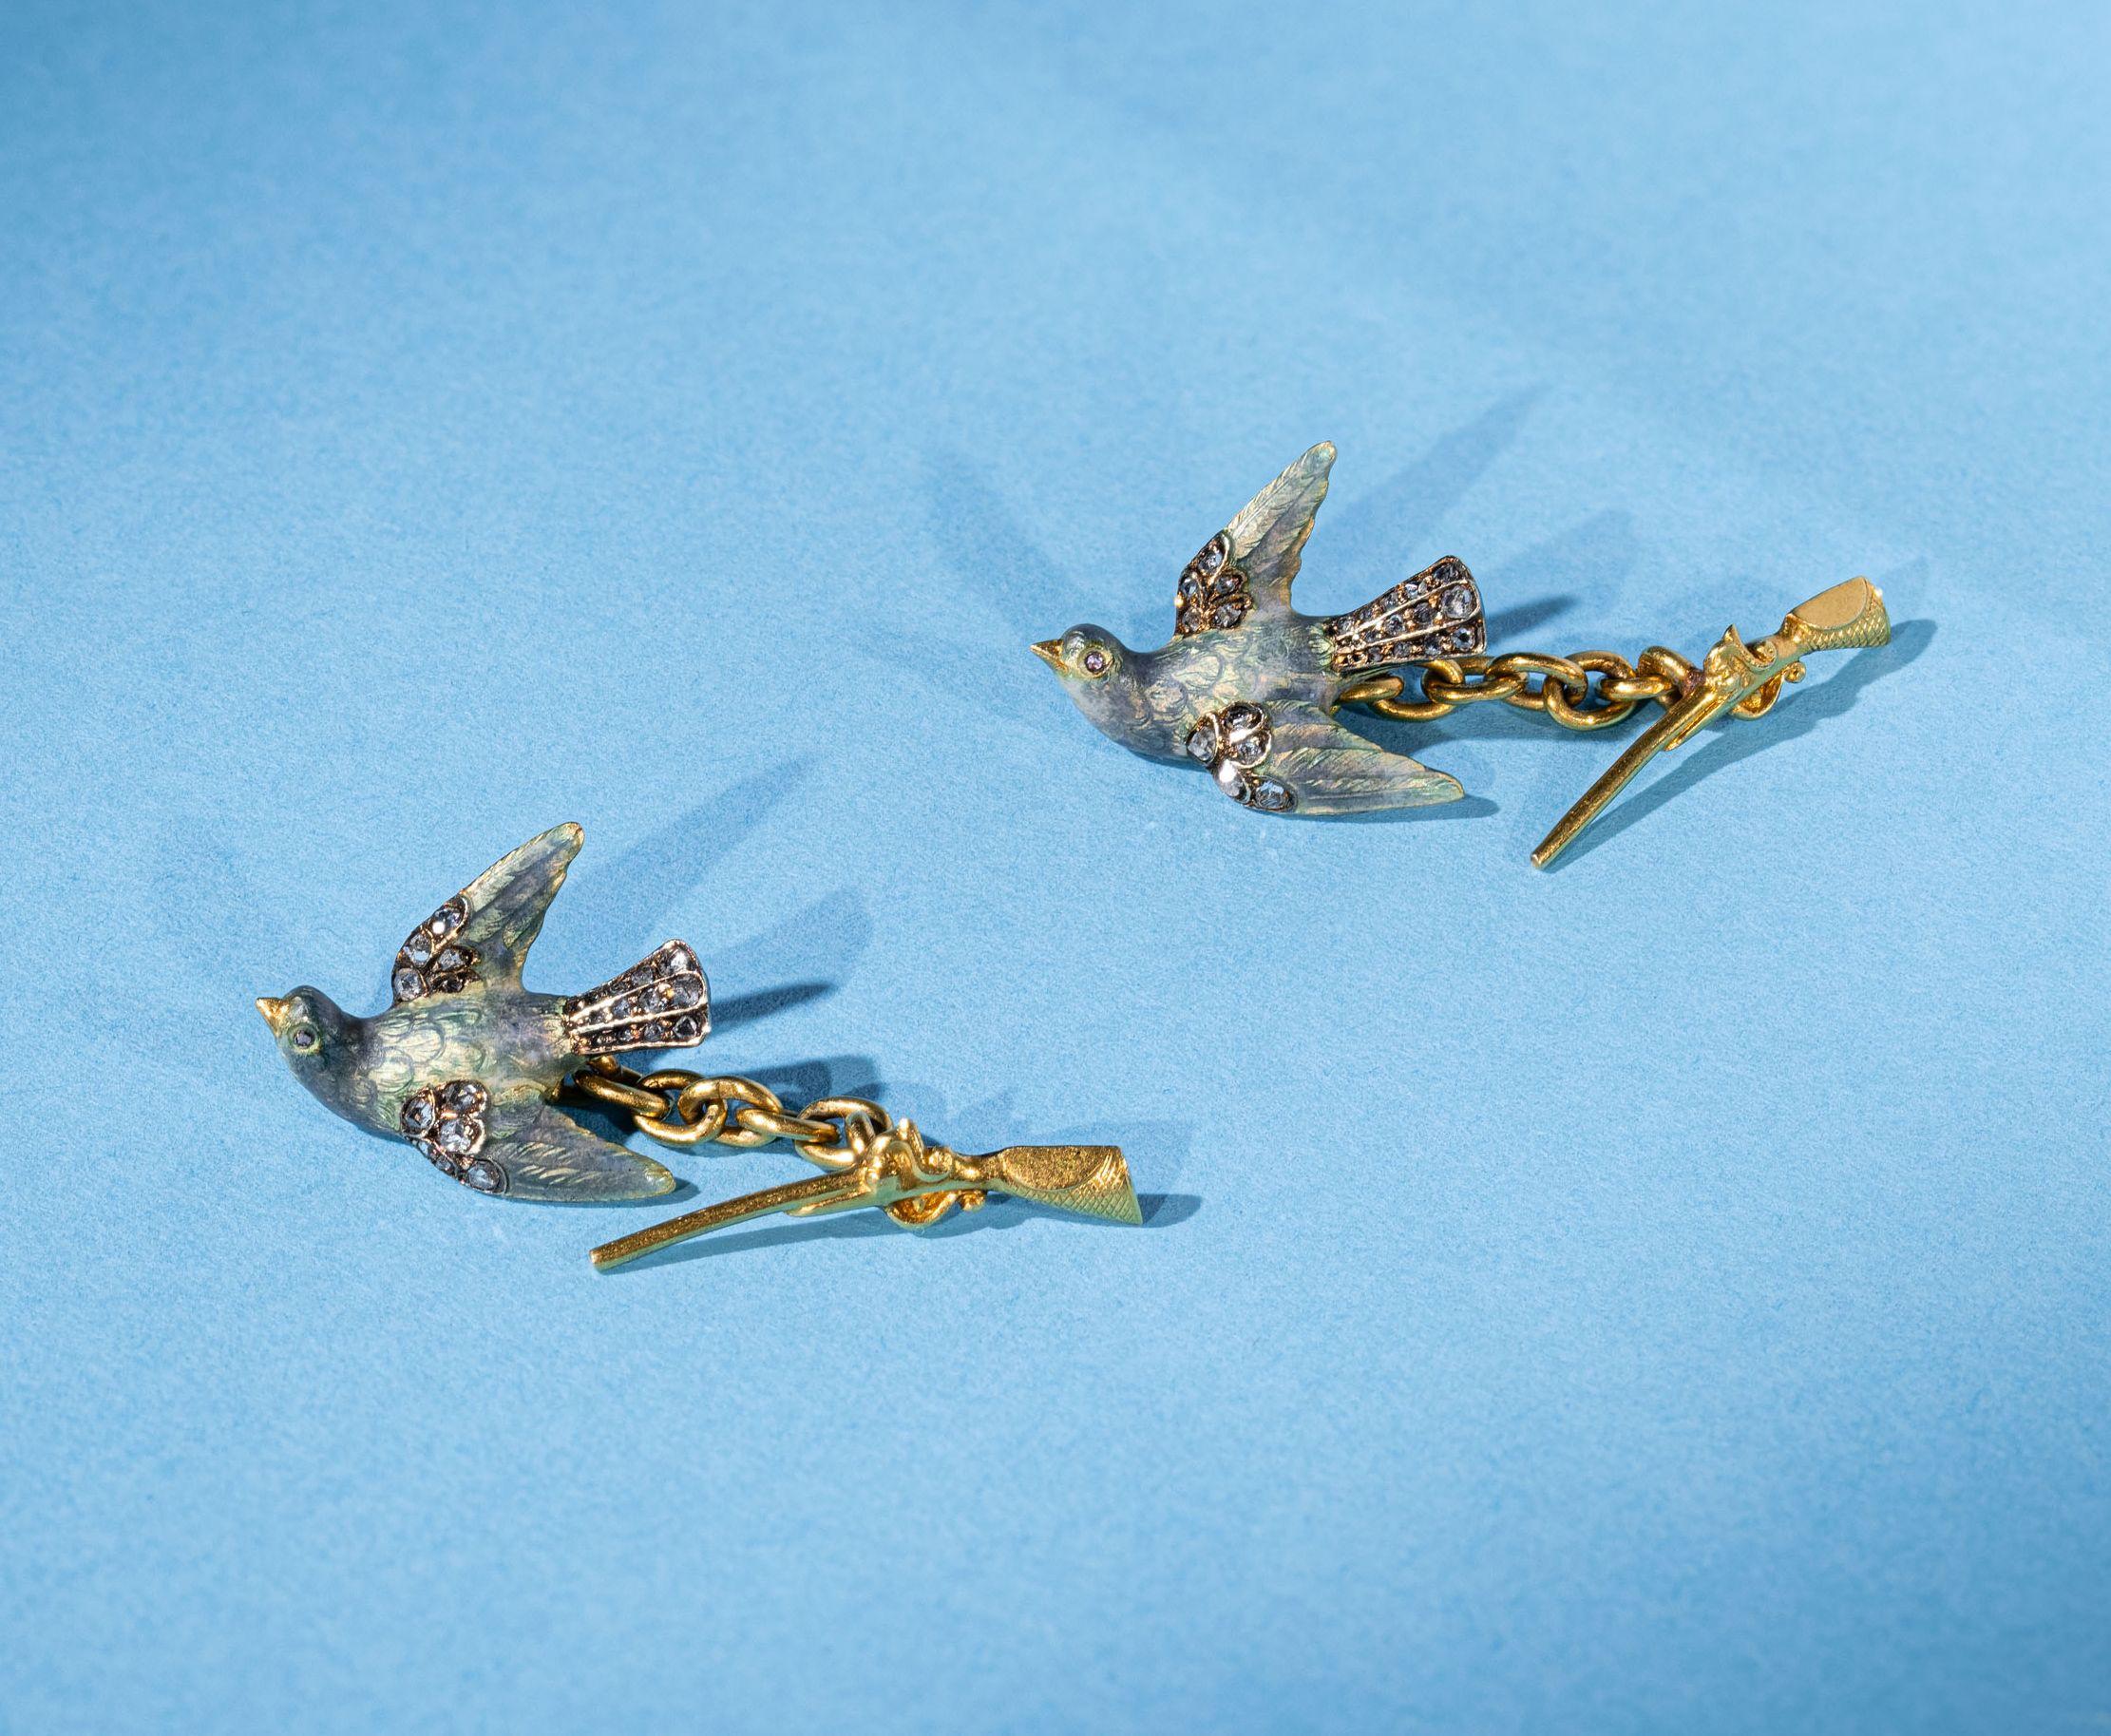 Dazzling pair of golden cufflinks designed as a turtle dove, applied with enamel and rose cut diamonds, the backs modelled as a shotgun. 
Early 20th century, French import assay marks. Early 20th century,
The delicately crafted, beautiful cufflinks